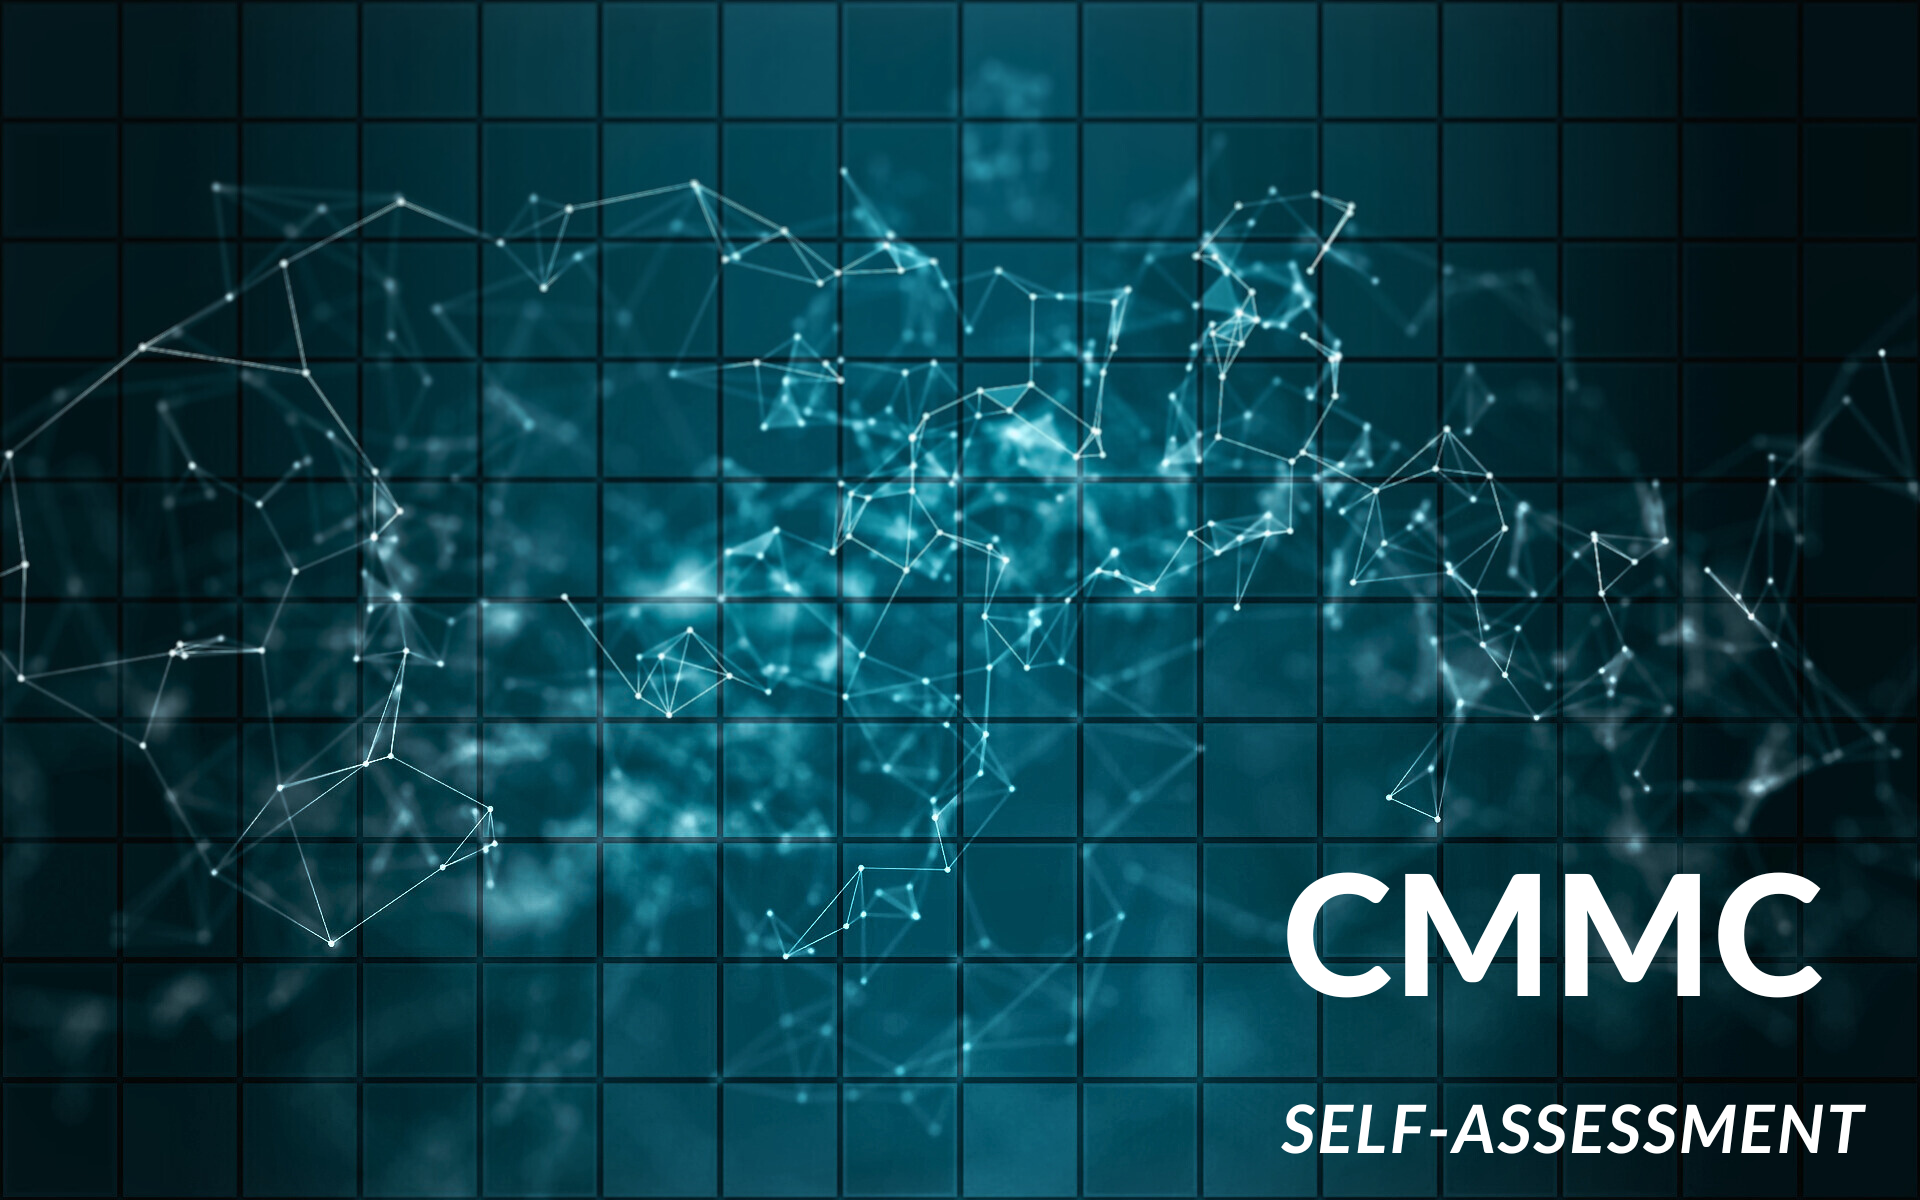 All About the CMMC Self-Assessment Requirements